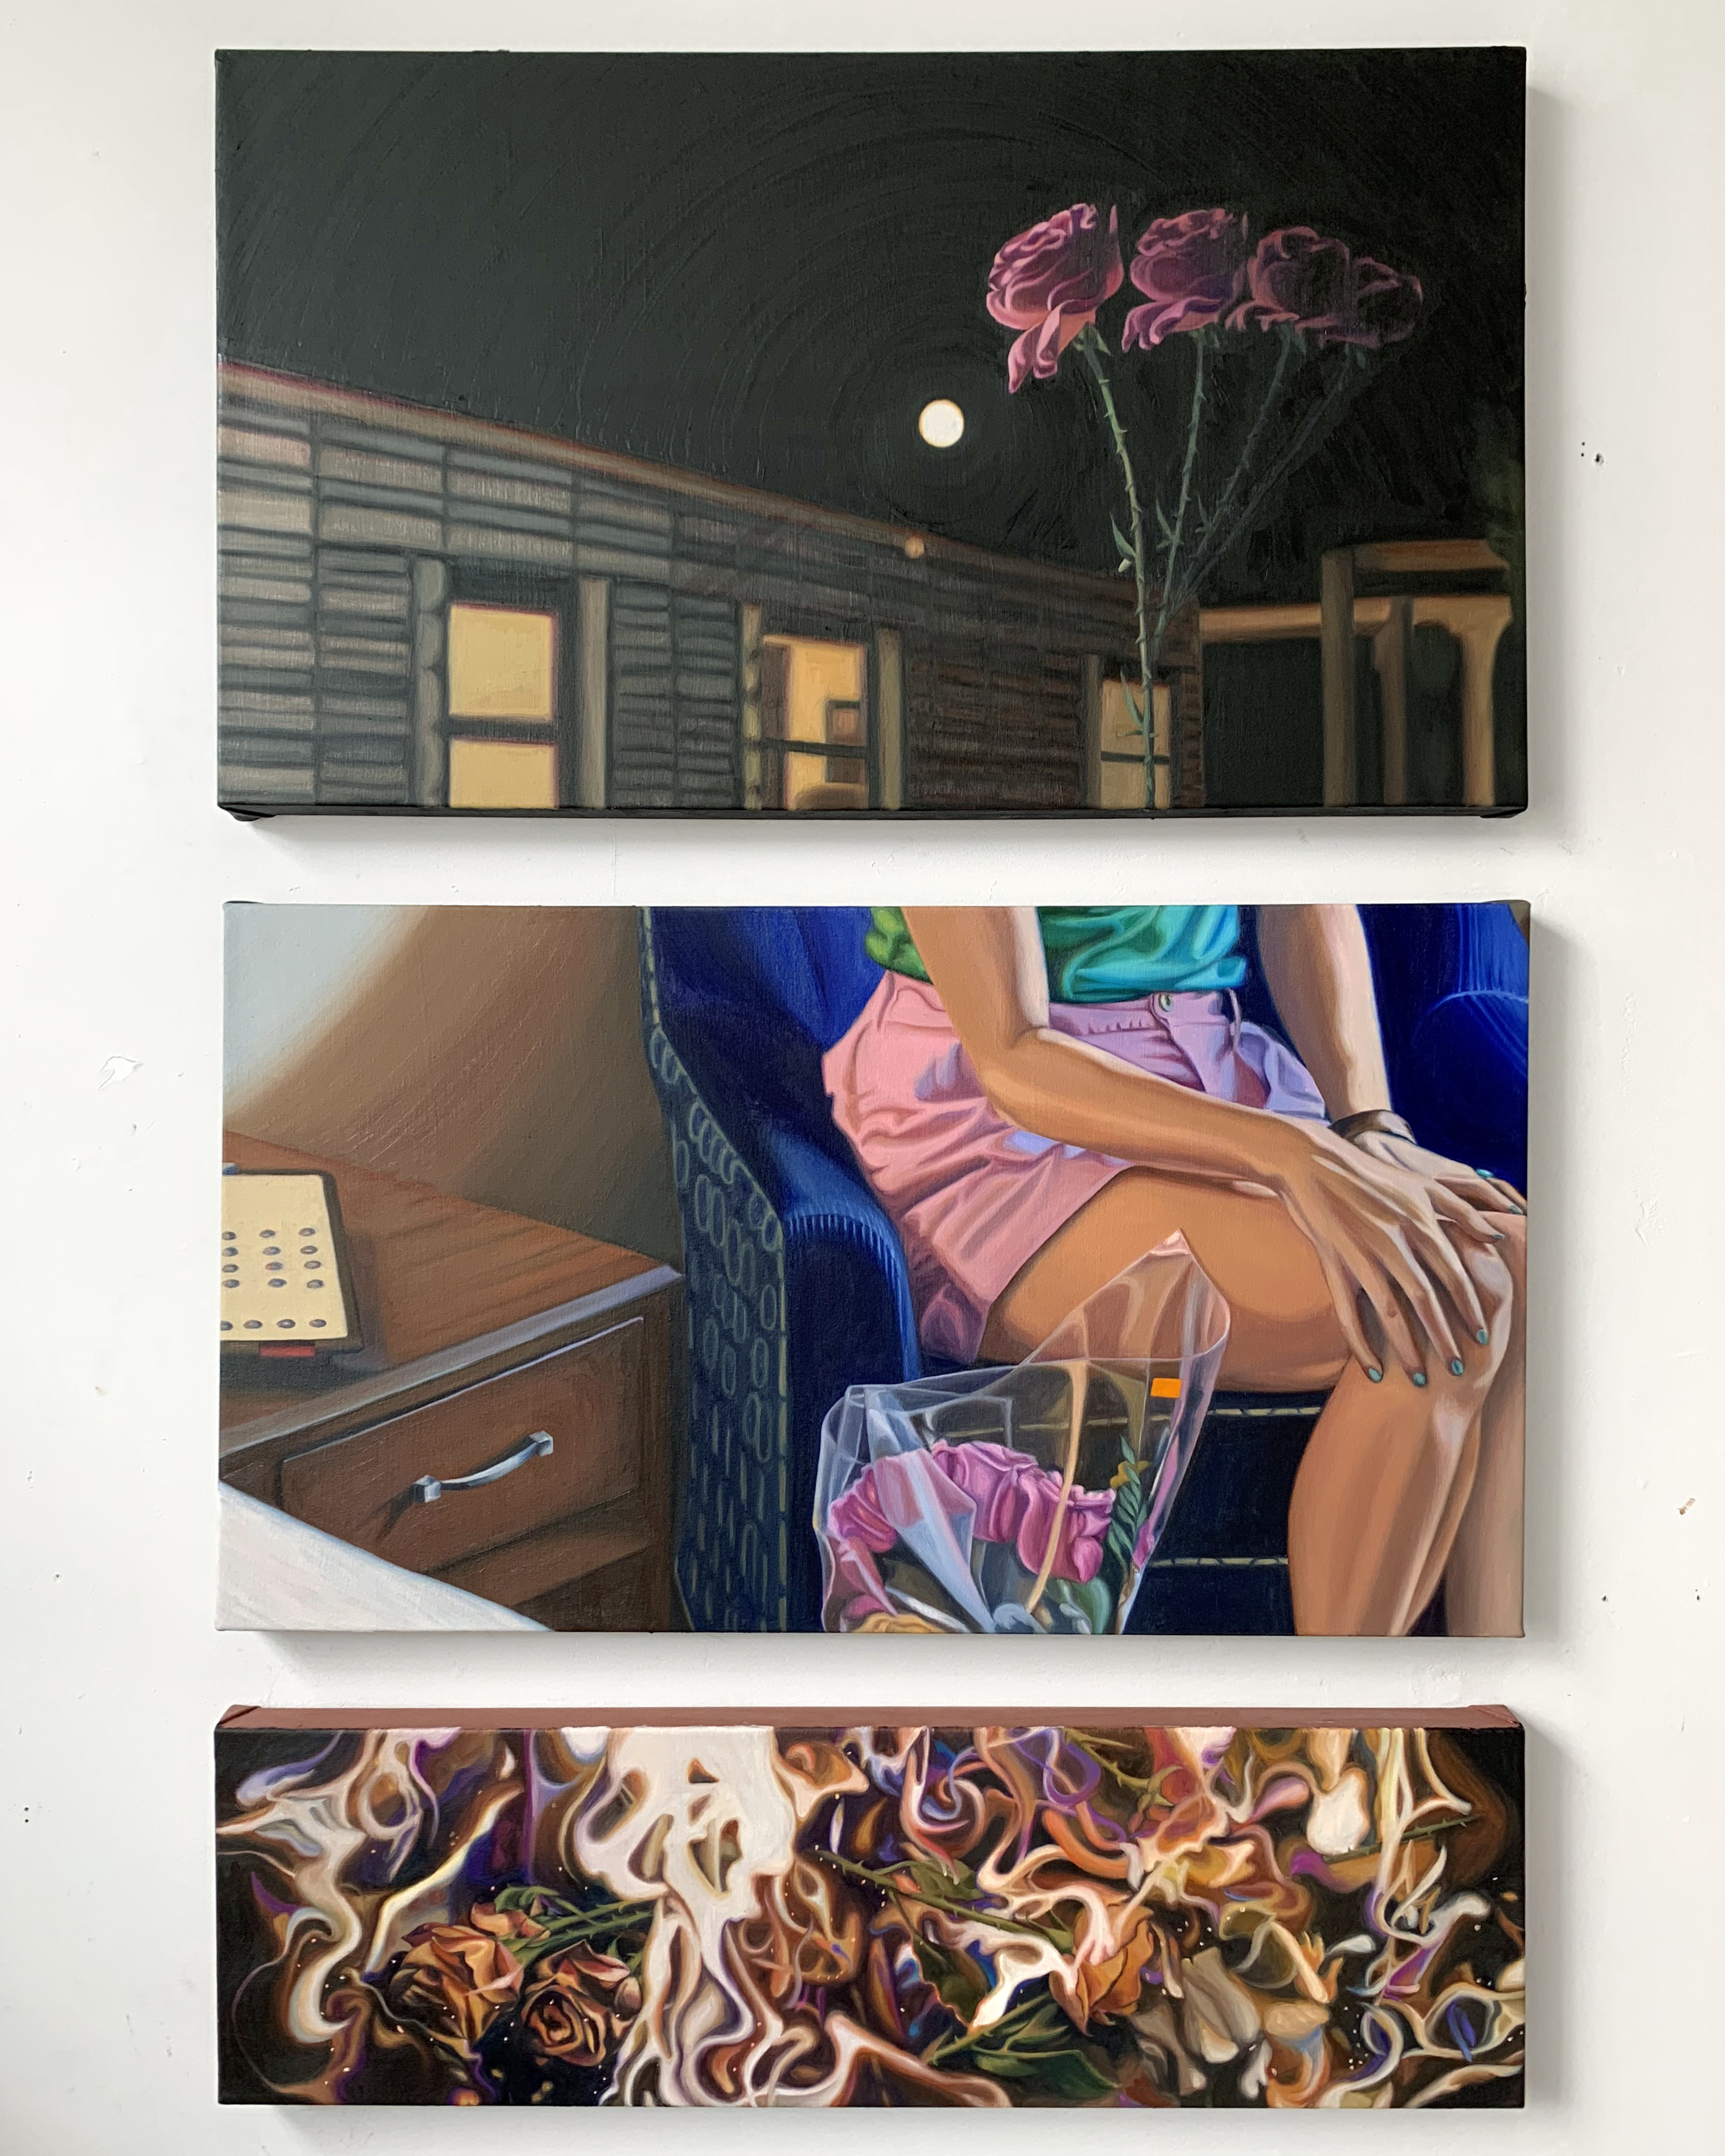 Household (triptych), 48x34 2021 <br>oil on canvas<br><br>"Households only account for 7-8% of carbon emissions in the US per year. This statistic tells me it is not the common consumer's fault or problem to fix. However, in imagining a socially responsible carbon removal society, our “emotional content and context around climate change: fear, loss, guilt, vulnerability, love, and longing” is a key capacity for “mobilize[ing] around the scale of action called for” (Buck, H.J. (2019). The After-Zero Society. In <i>After Geoengineering: Climate Tragedy, Repair, and Resotration.</i> (p. 195). Verso.)